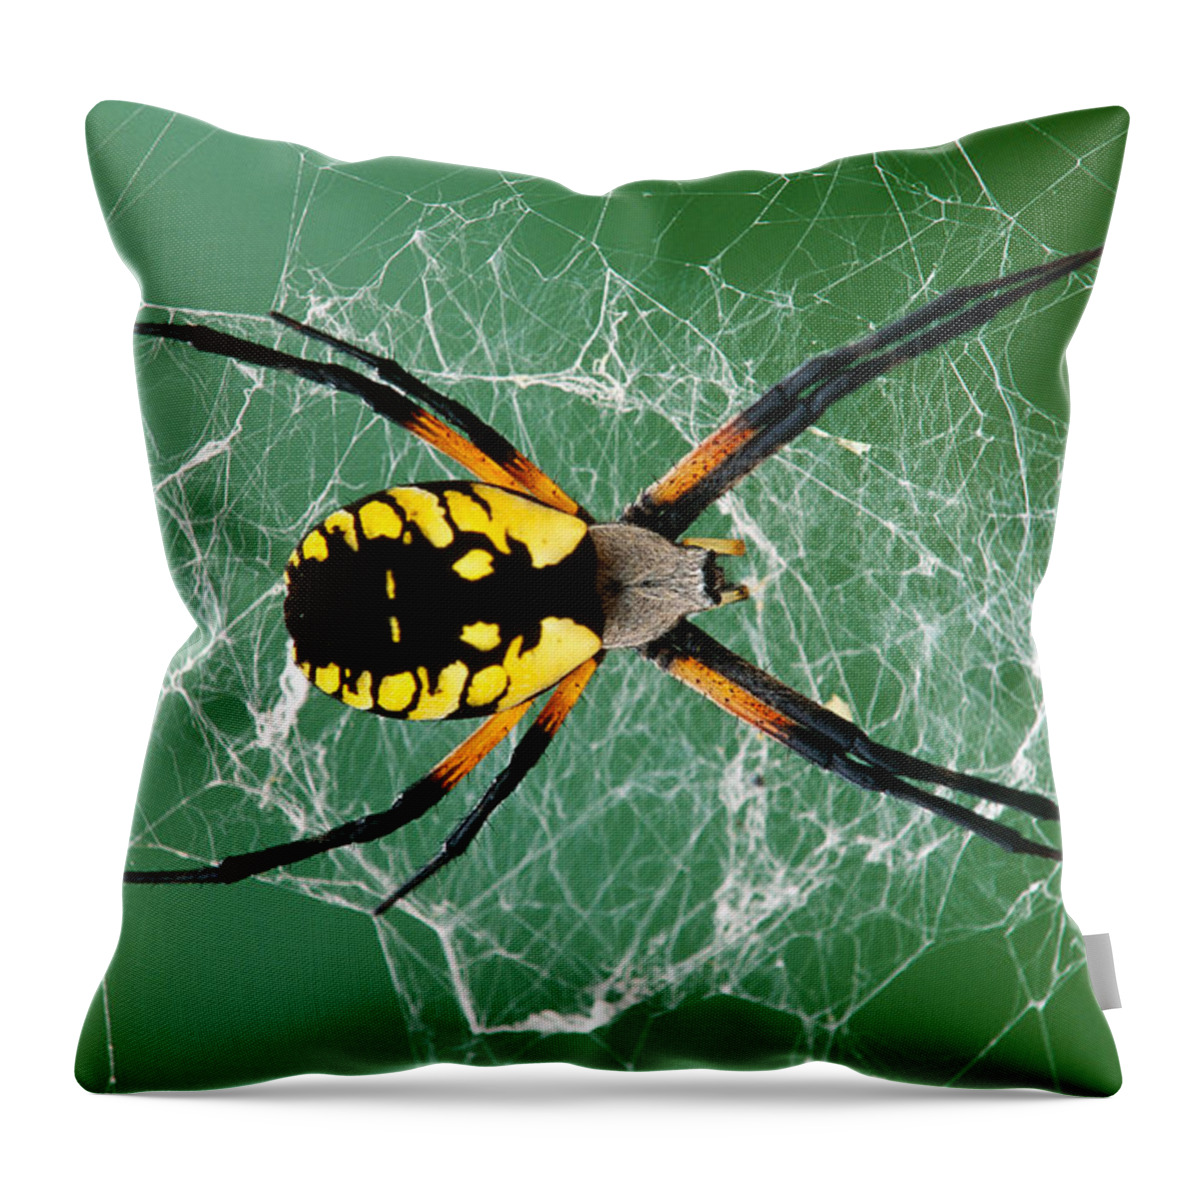 Arachnid Throw Pillow featuring the photograph Black-and-yellow Argiope Spider #1 by Michael Lustbader